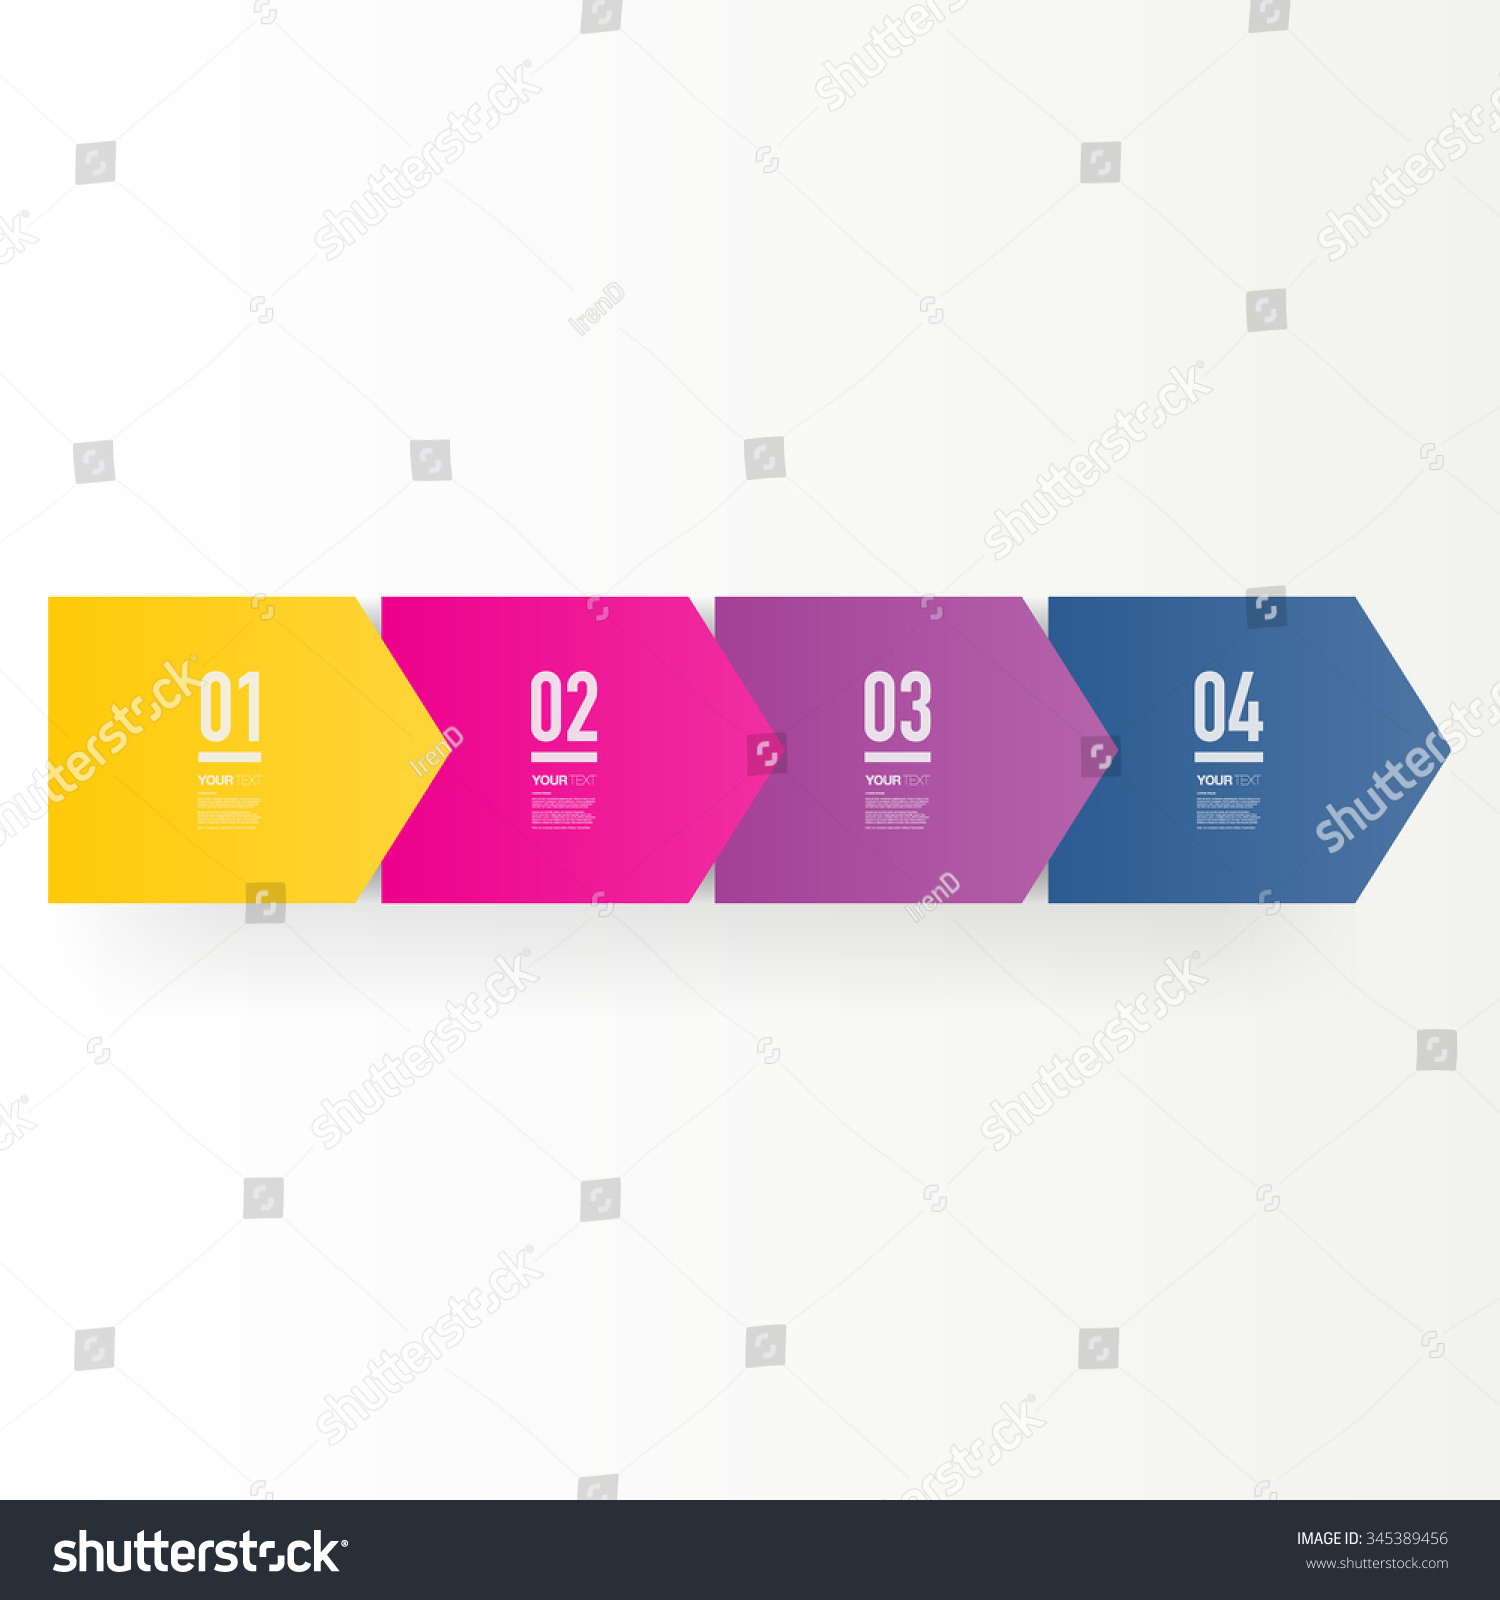 Step By Step Infographic Design 3d Stock Vector 345389456